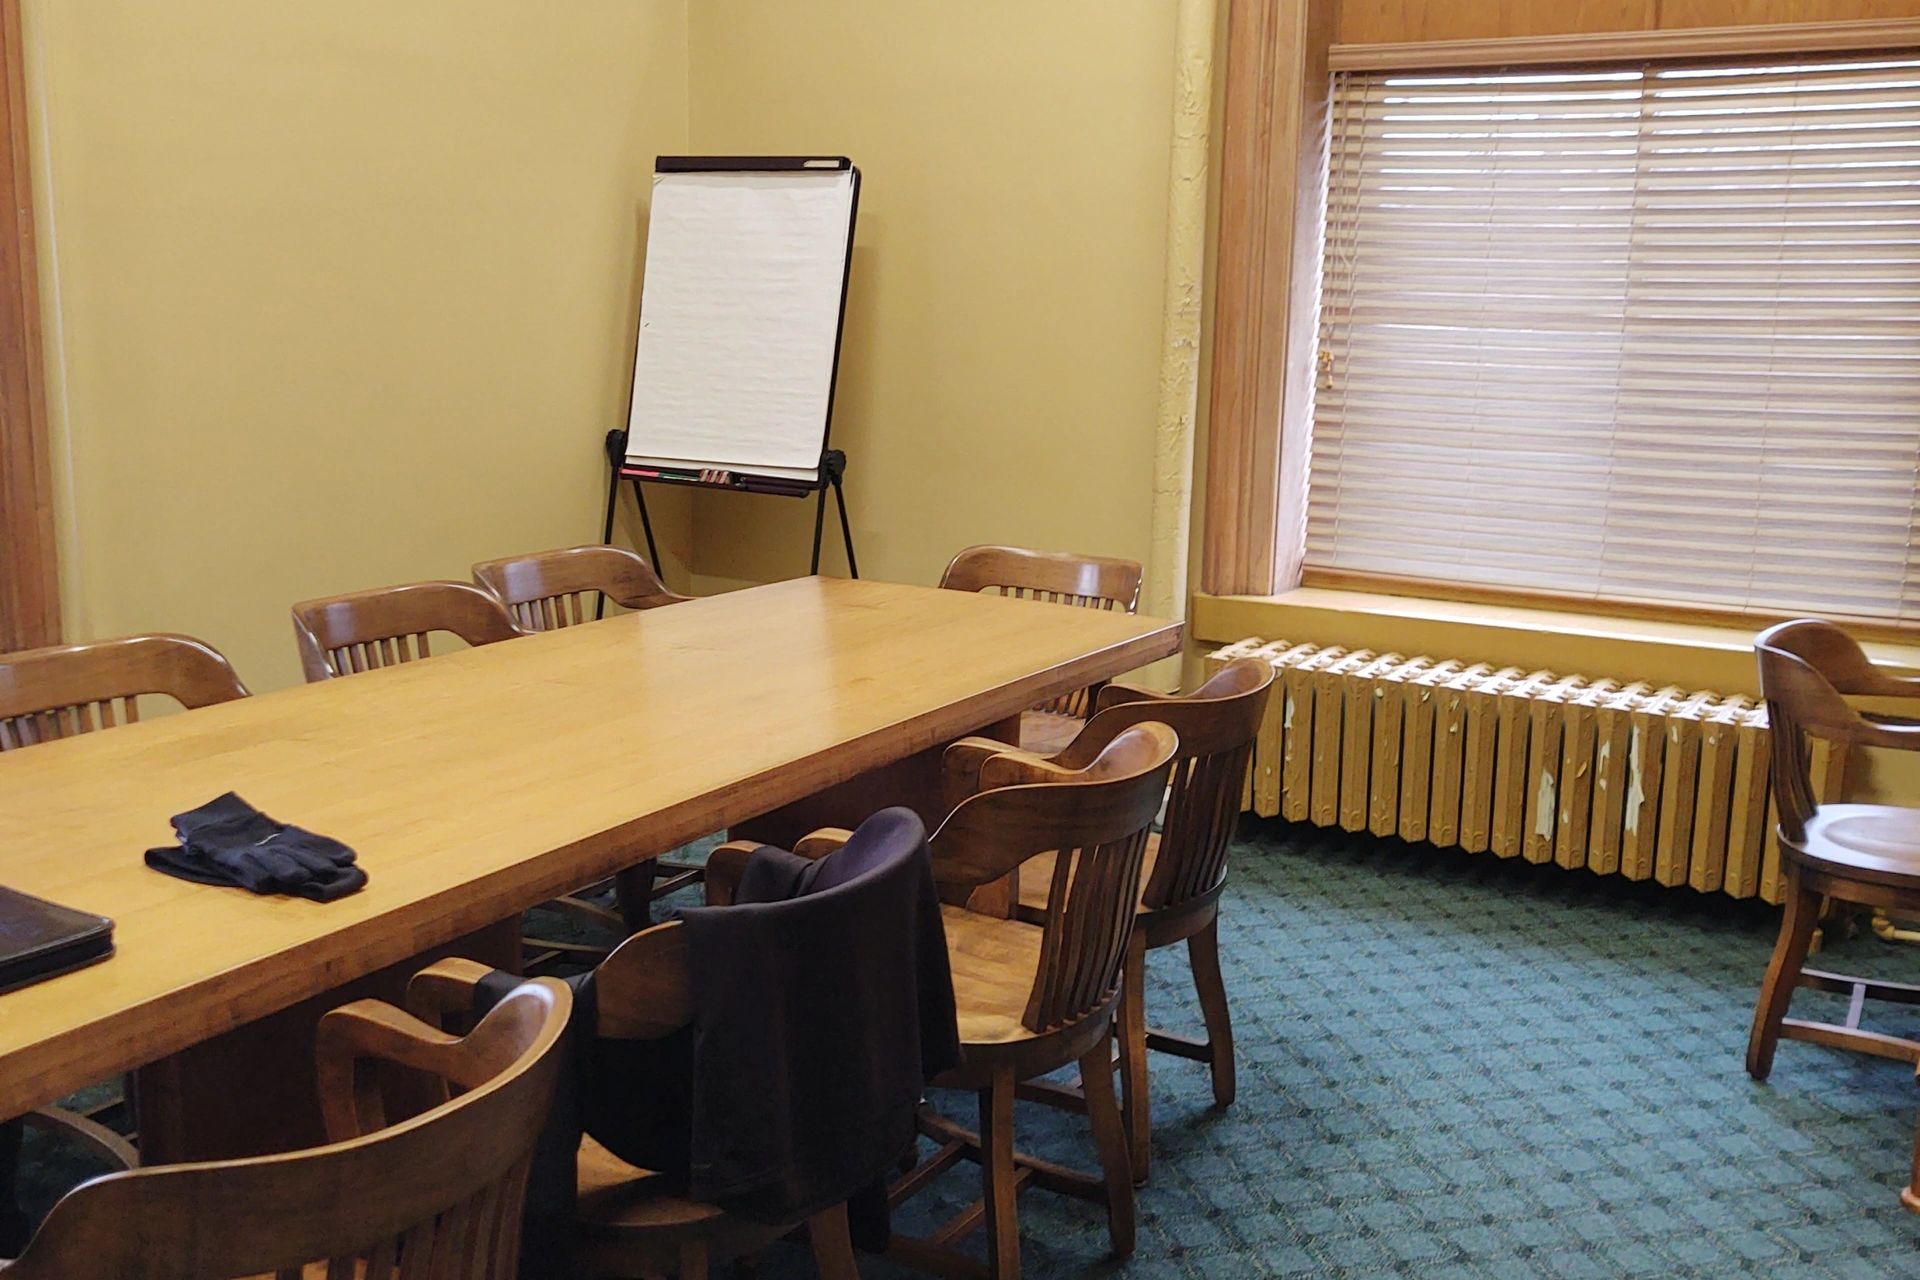 Conference room at a courthouse in Ohio